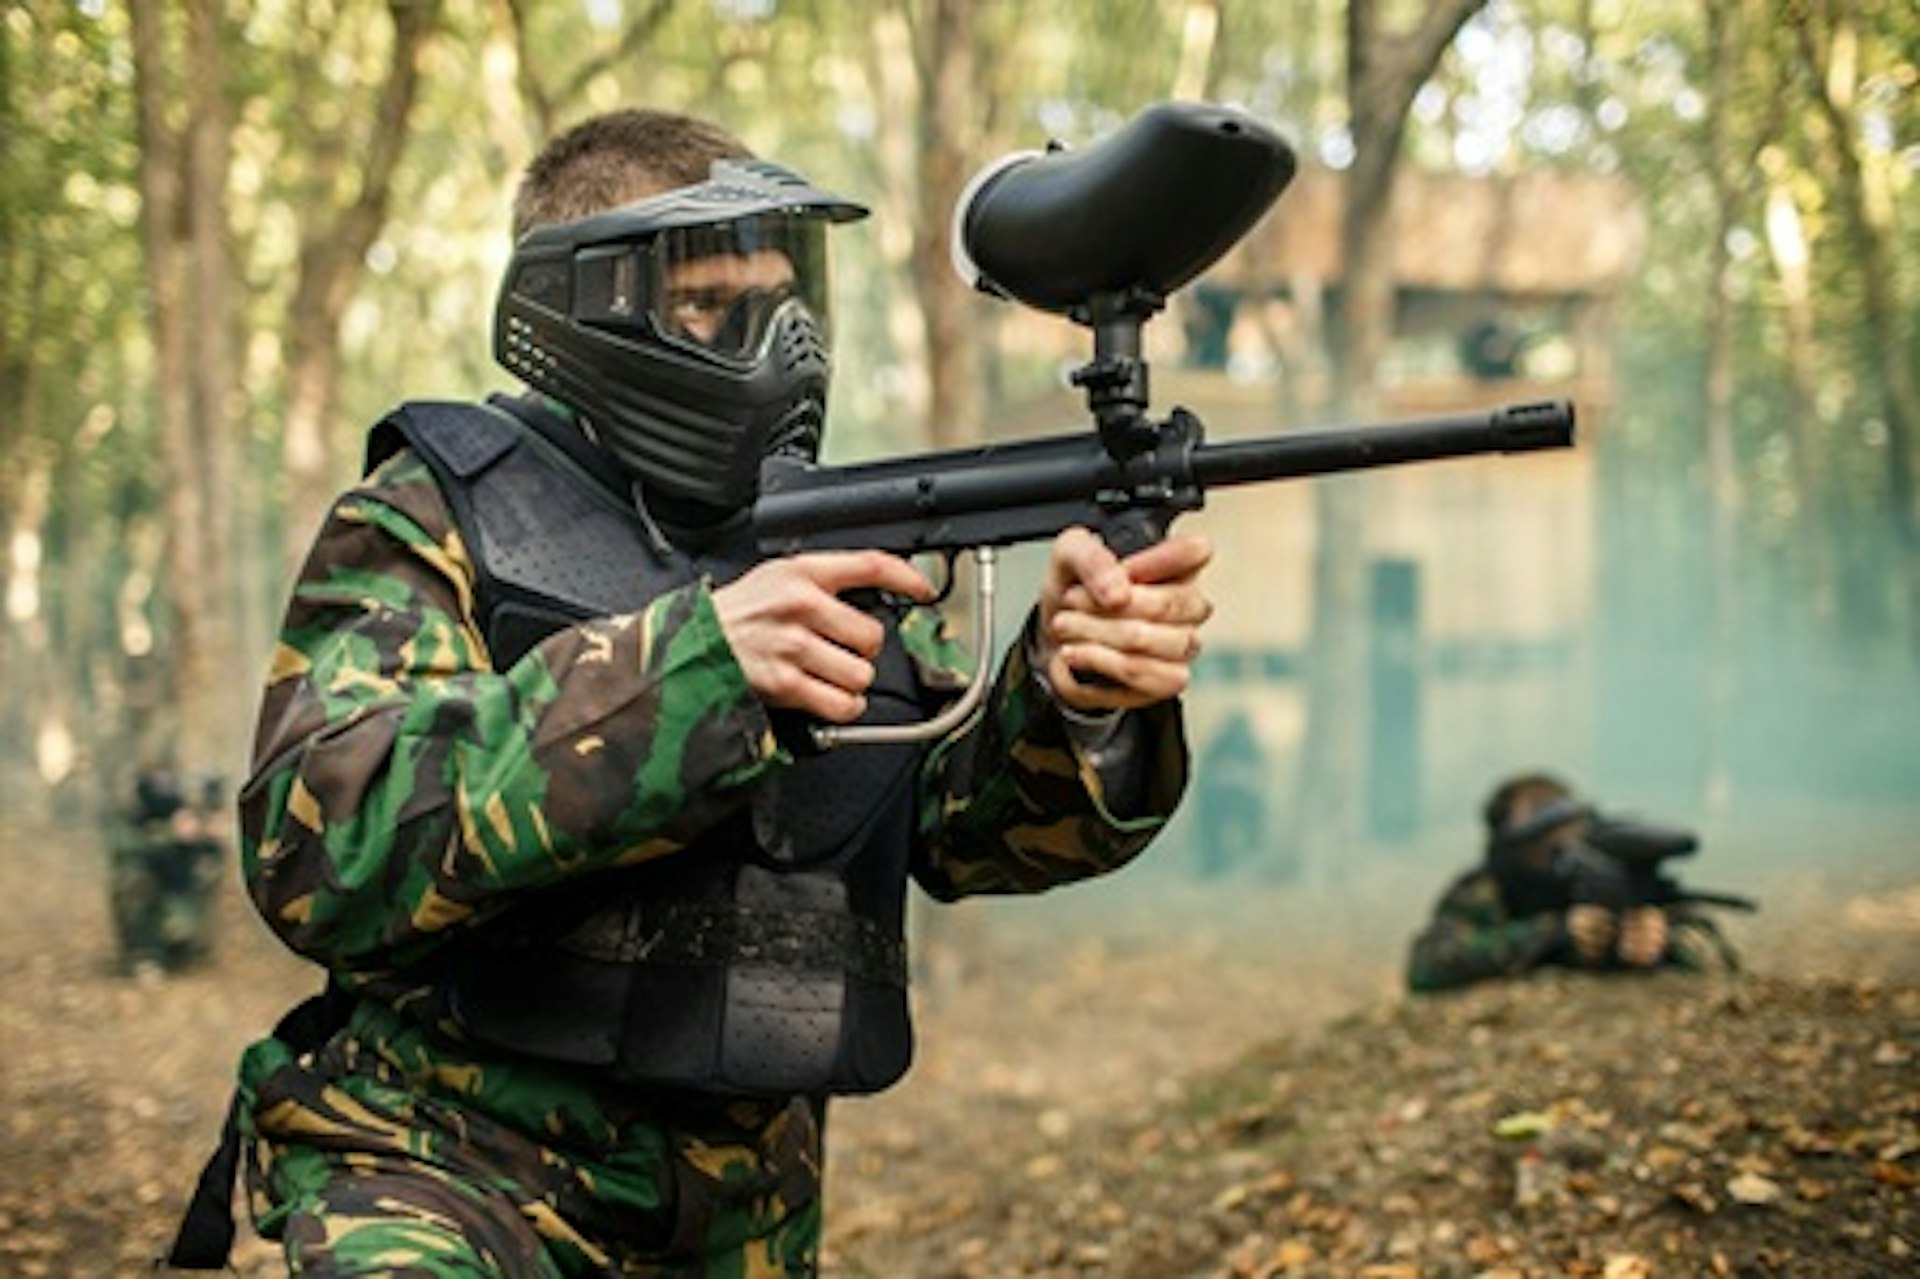 Full Day Paintballing for Two 4